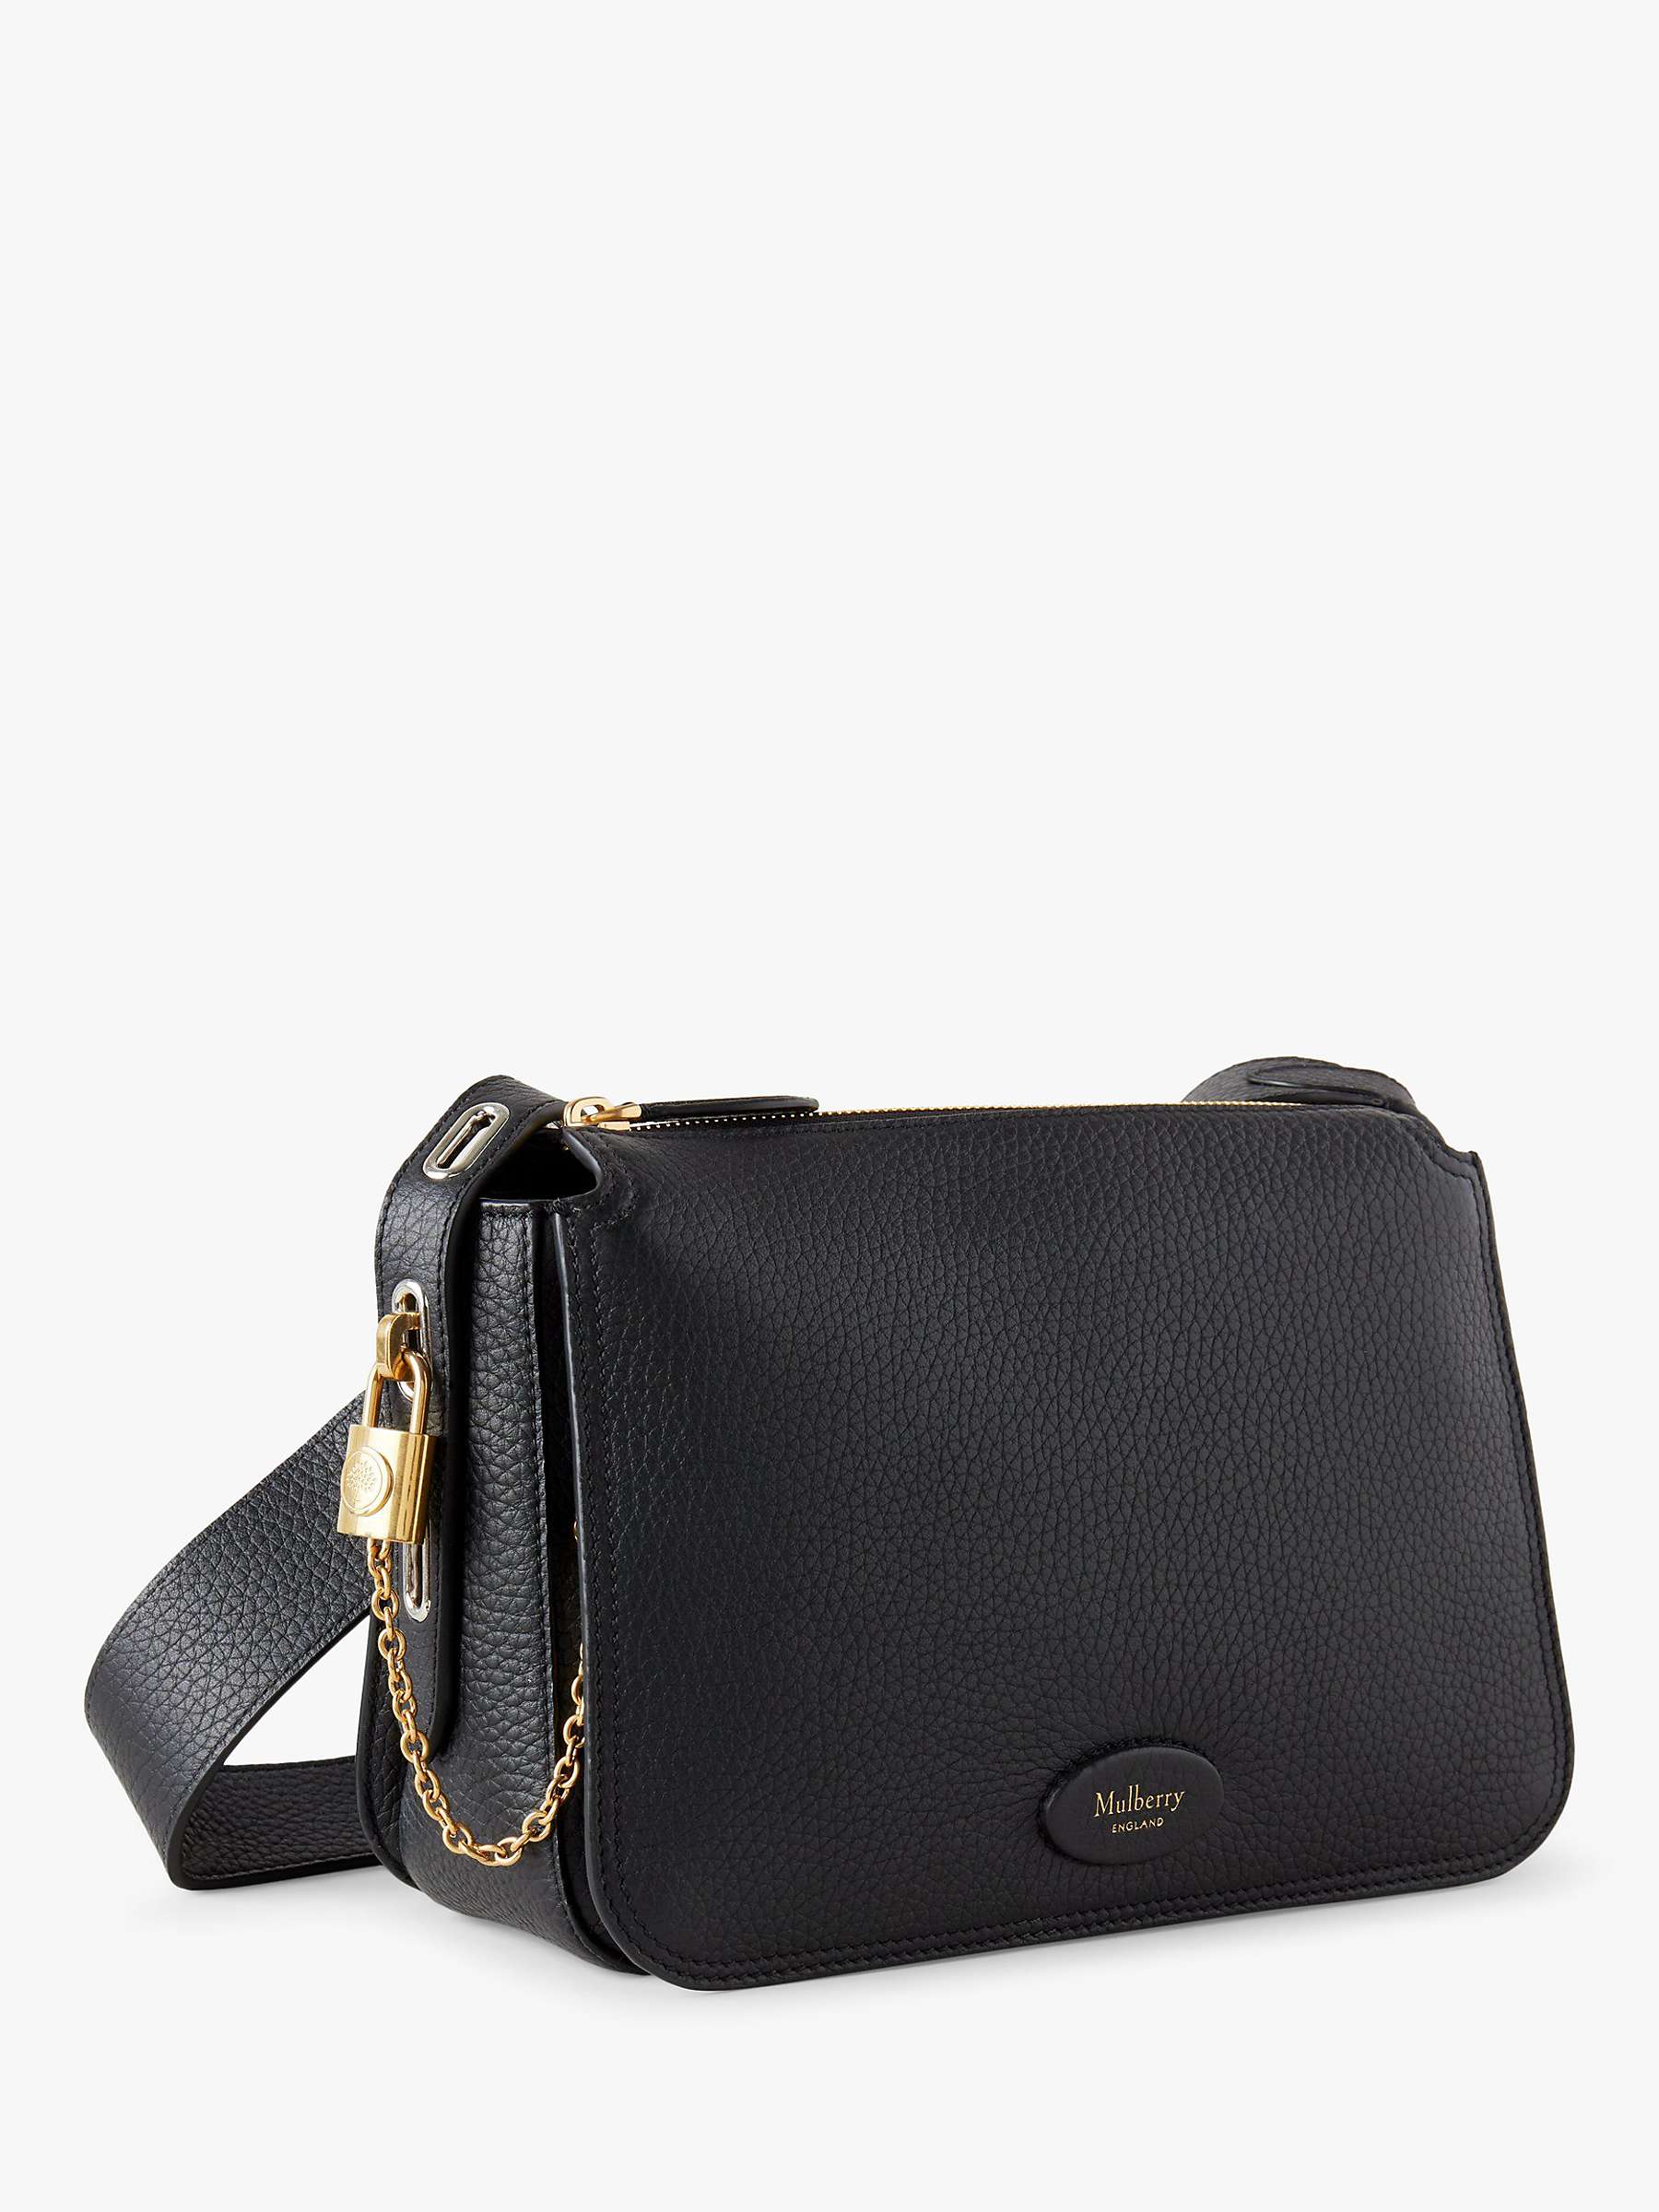 Buy Mulberry Billie Small Classic Grain Leather Cross Body Bag Online at johnlewis.com